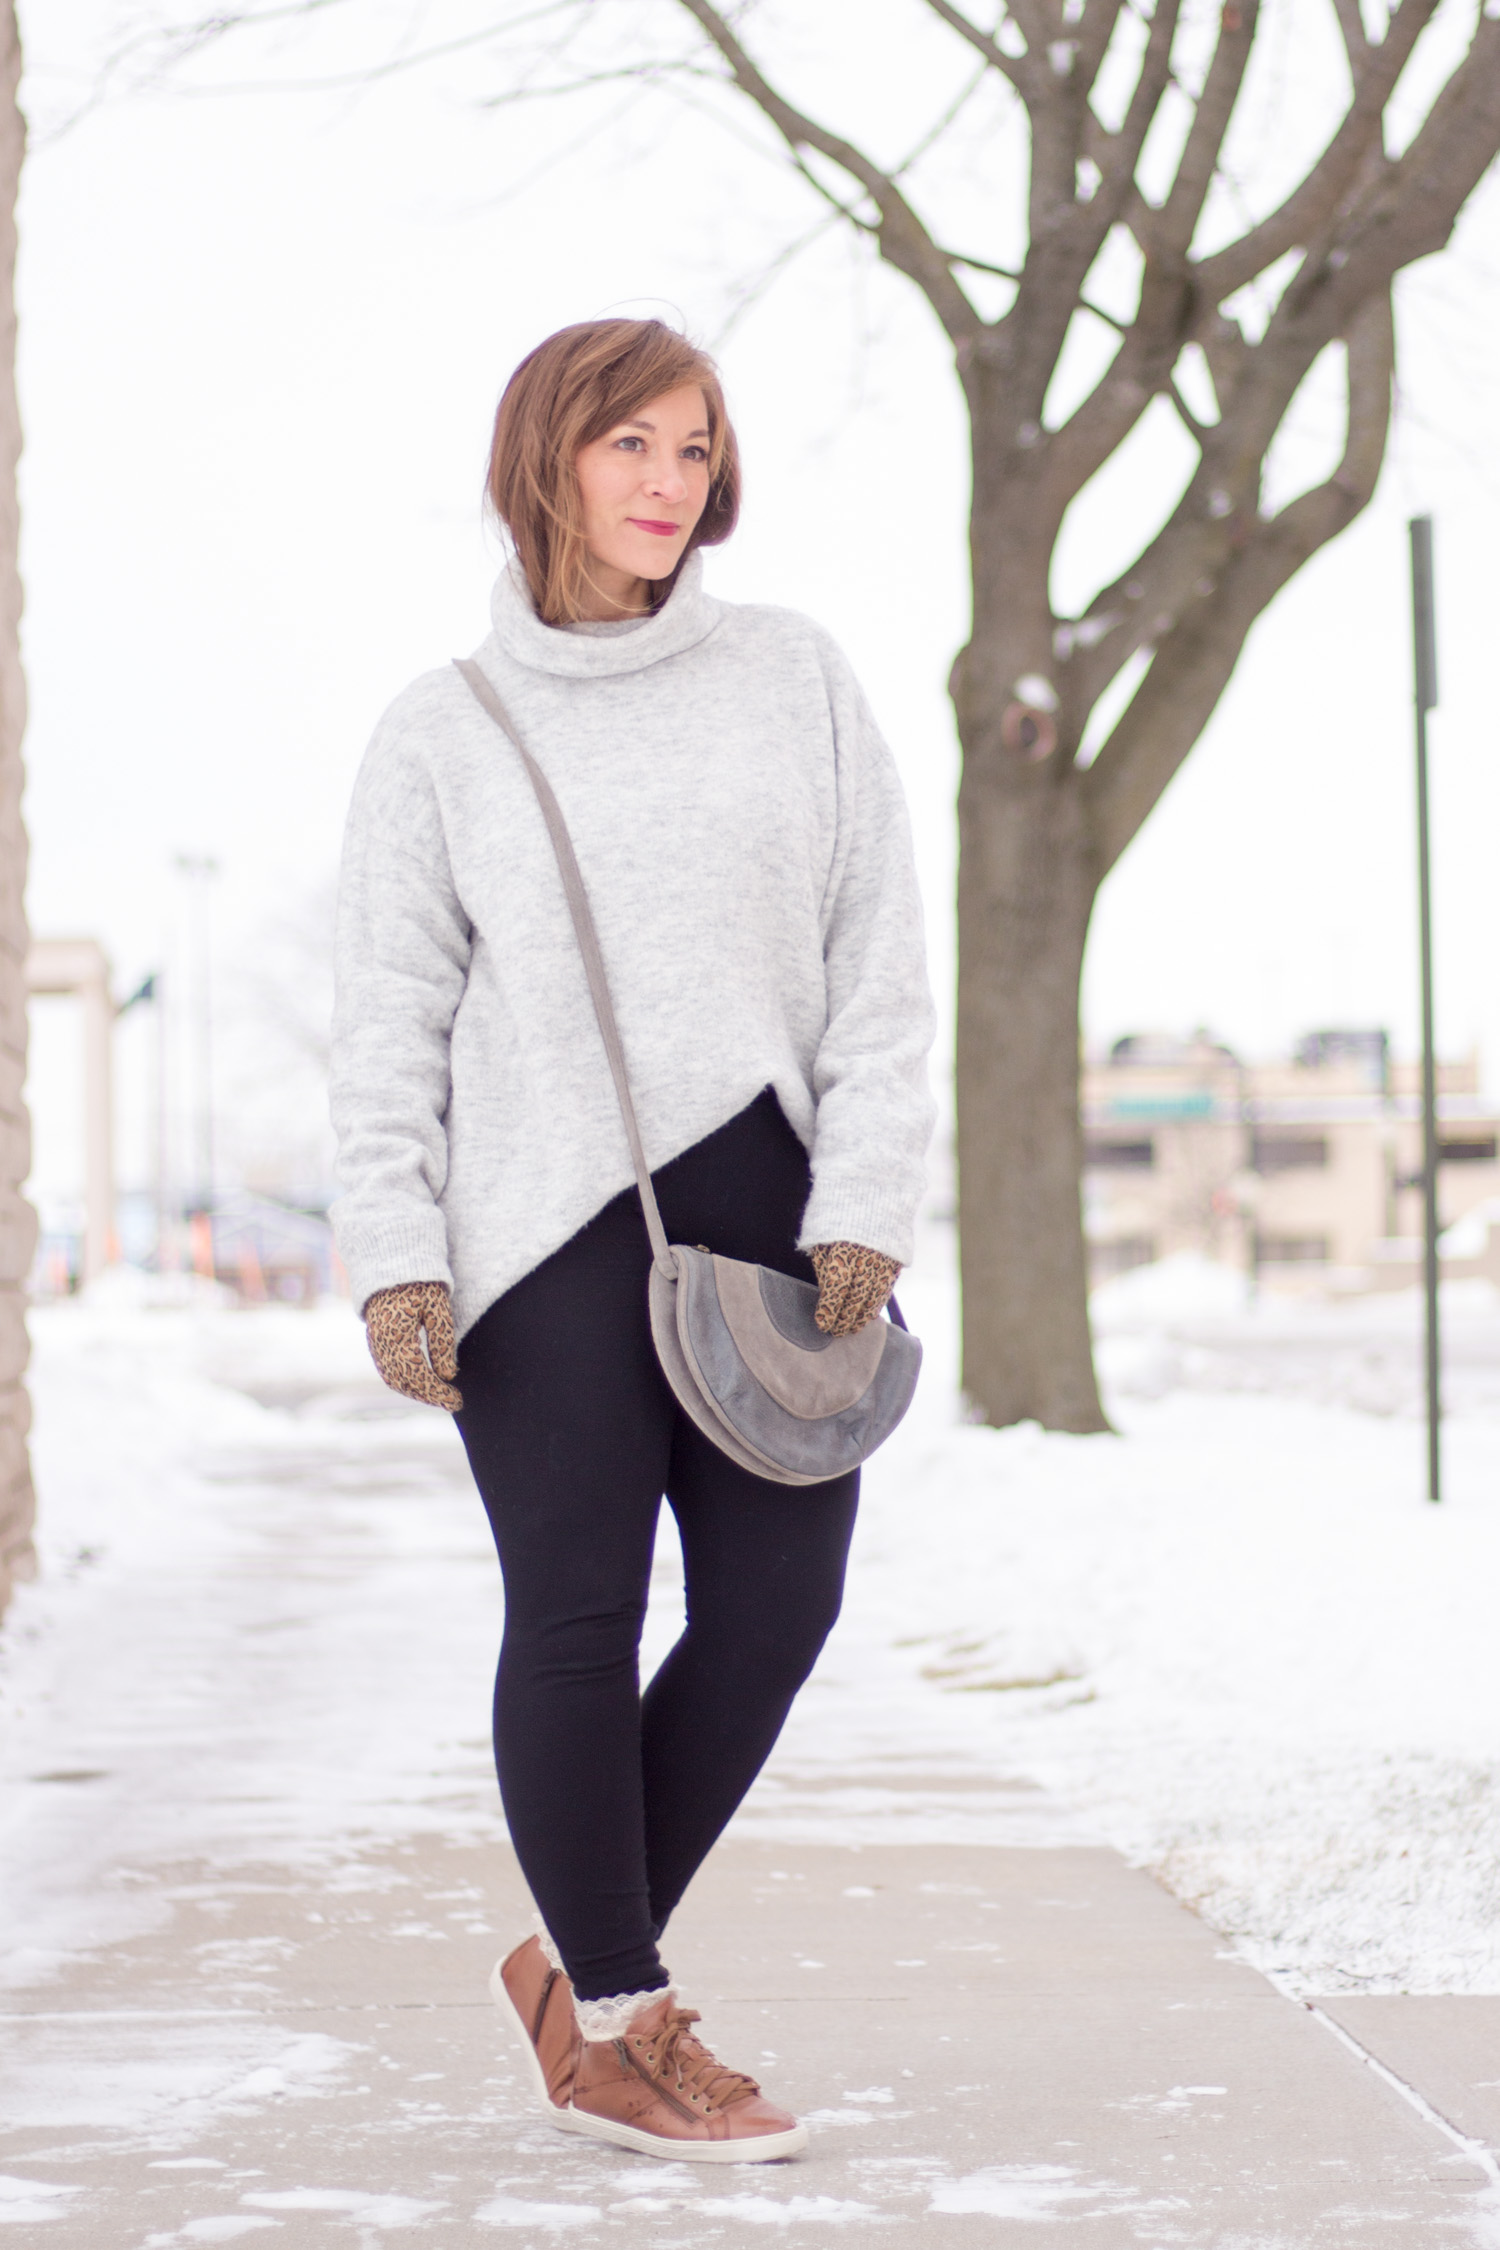 comfy cold weather outfits